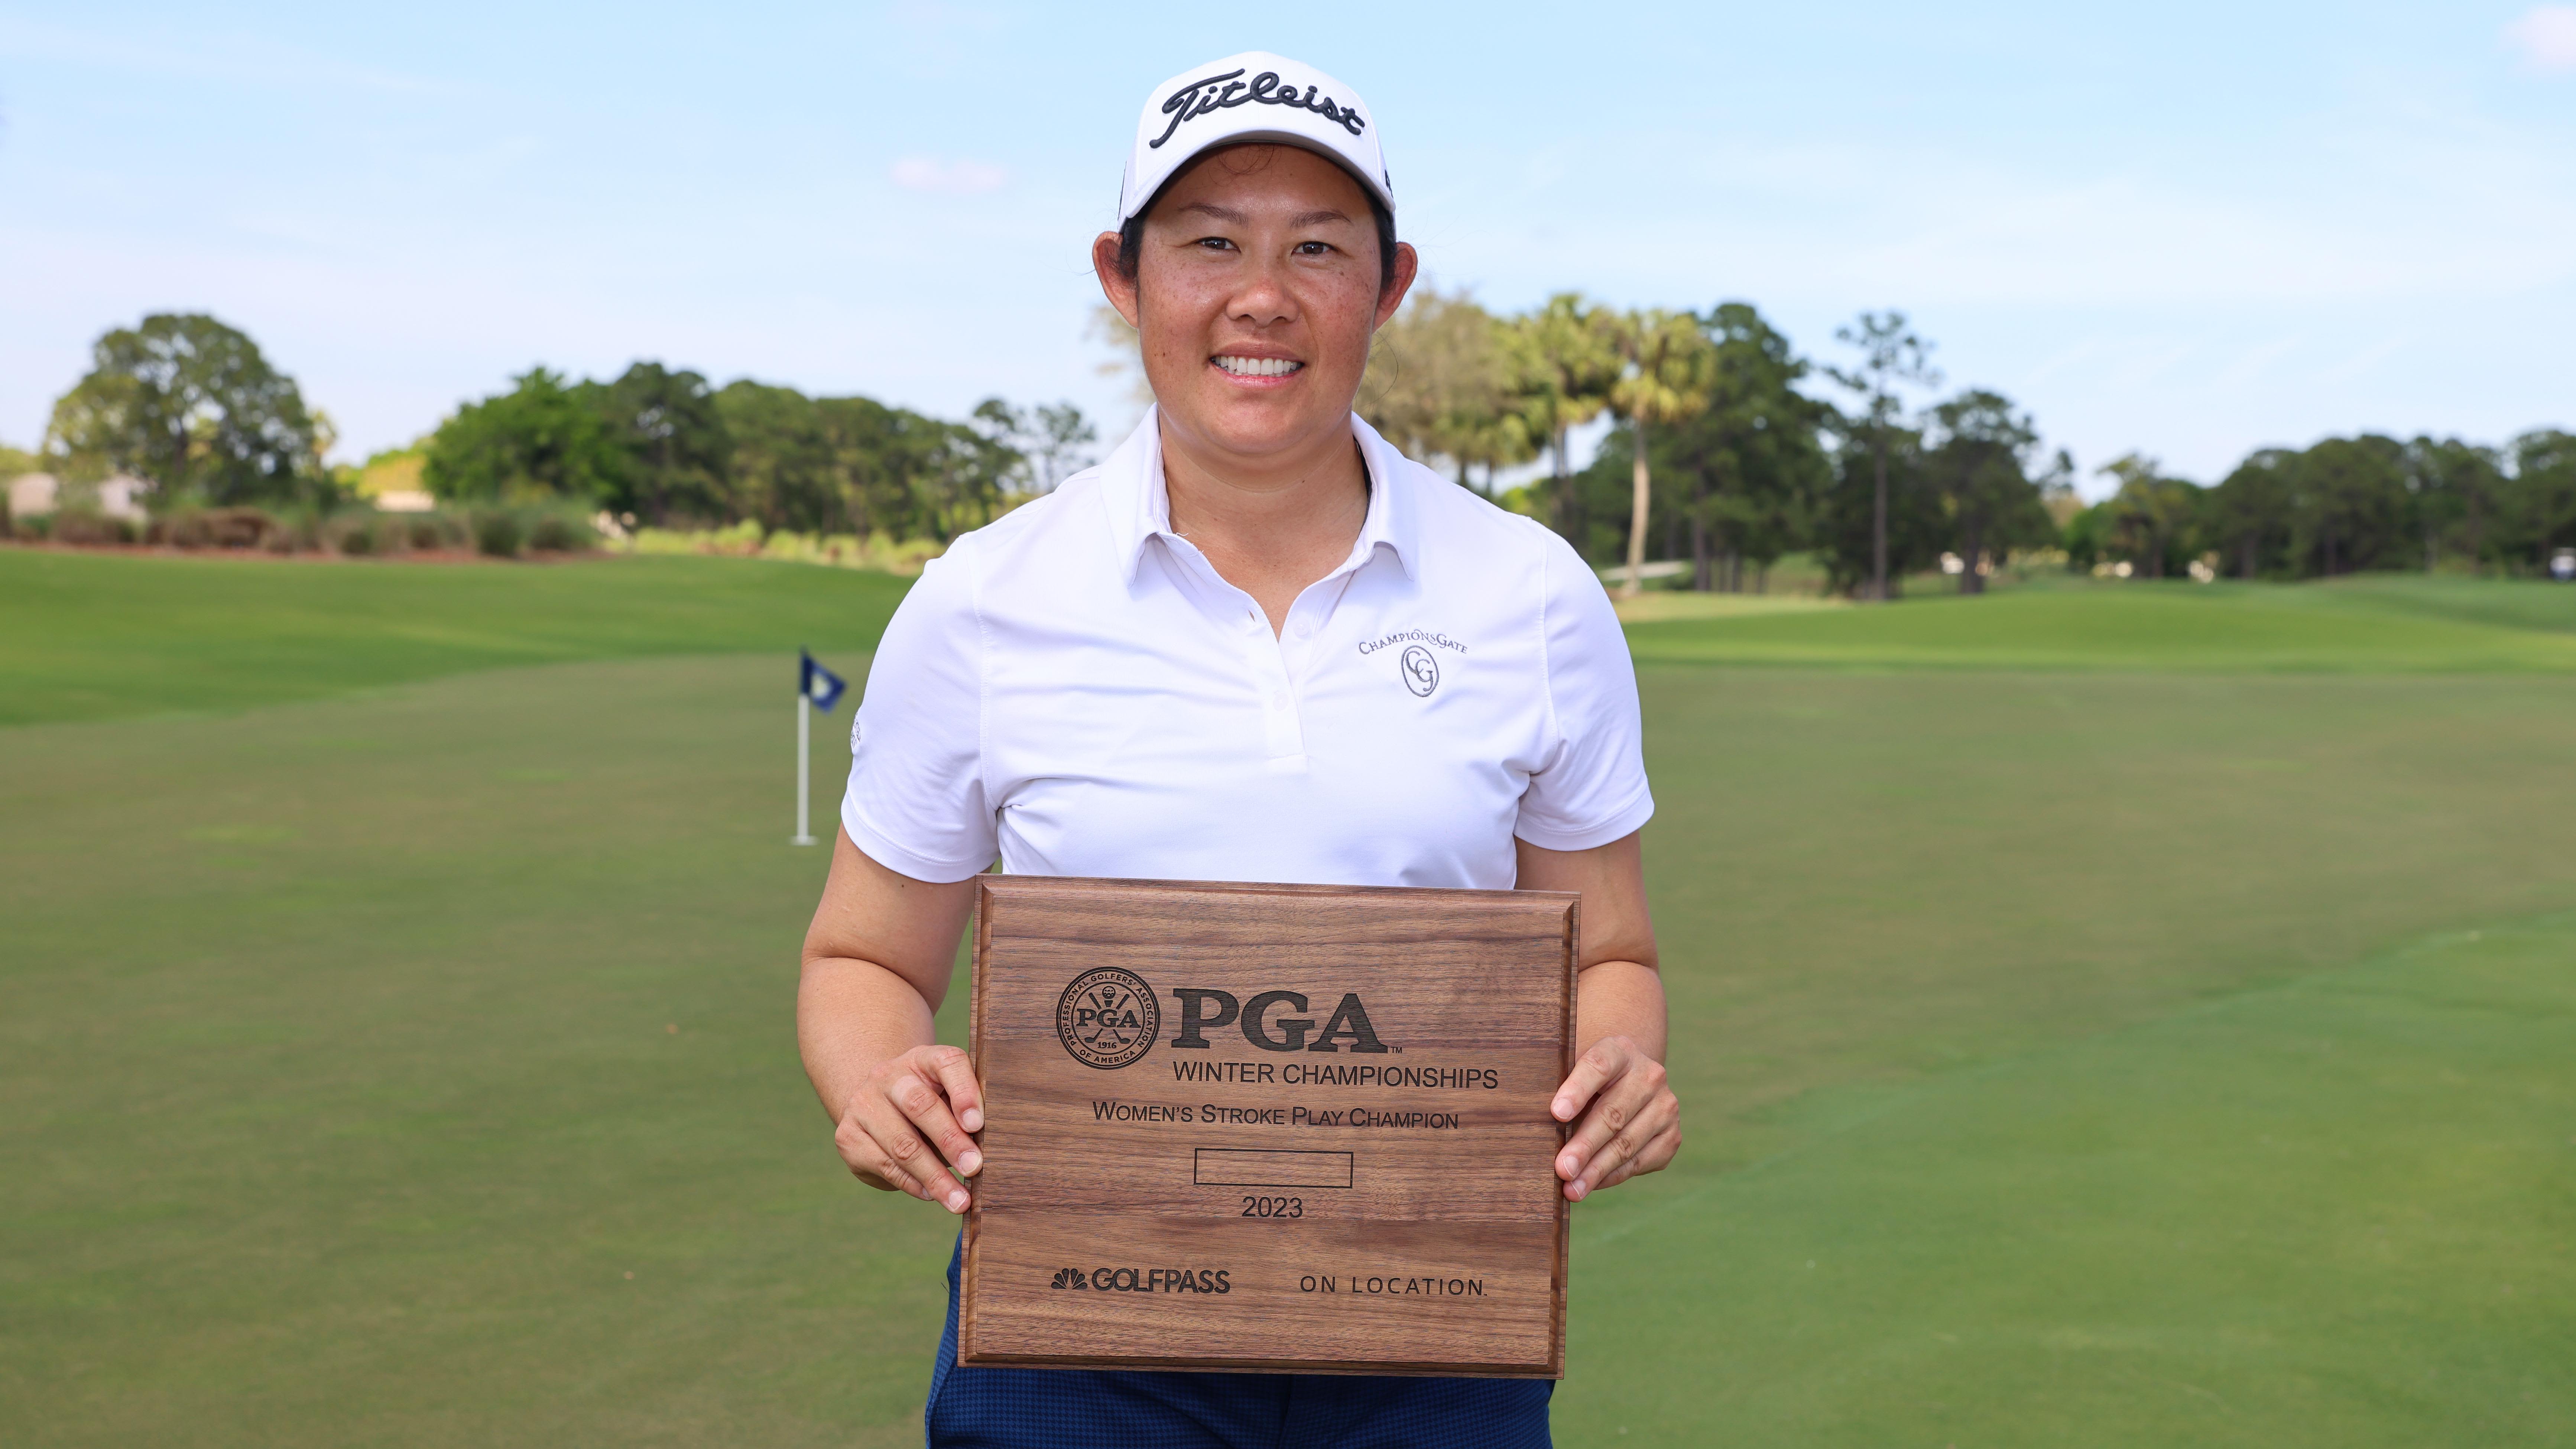 A thrilling final three holes elevated Sandra Changkija to victory in the 2023 PGA Women's Stroke Play Championship.